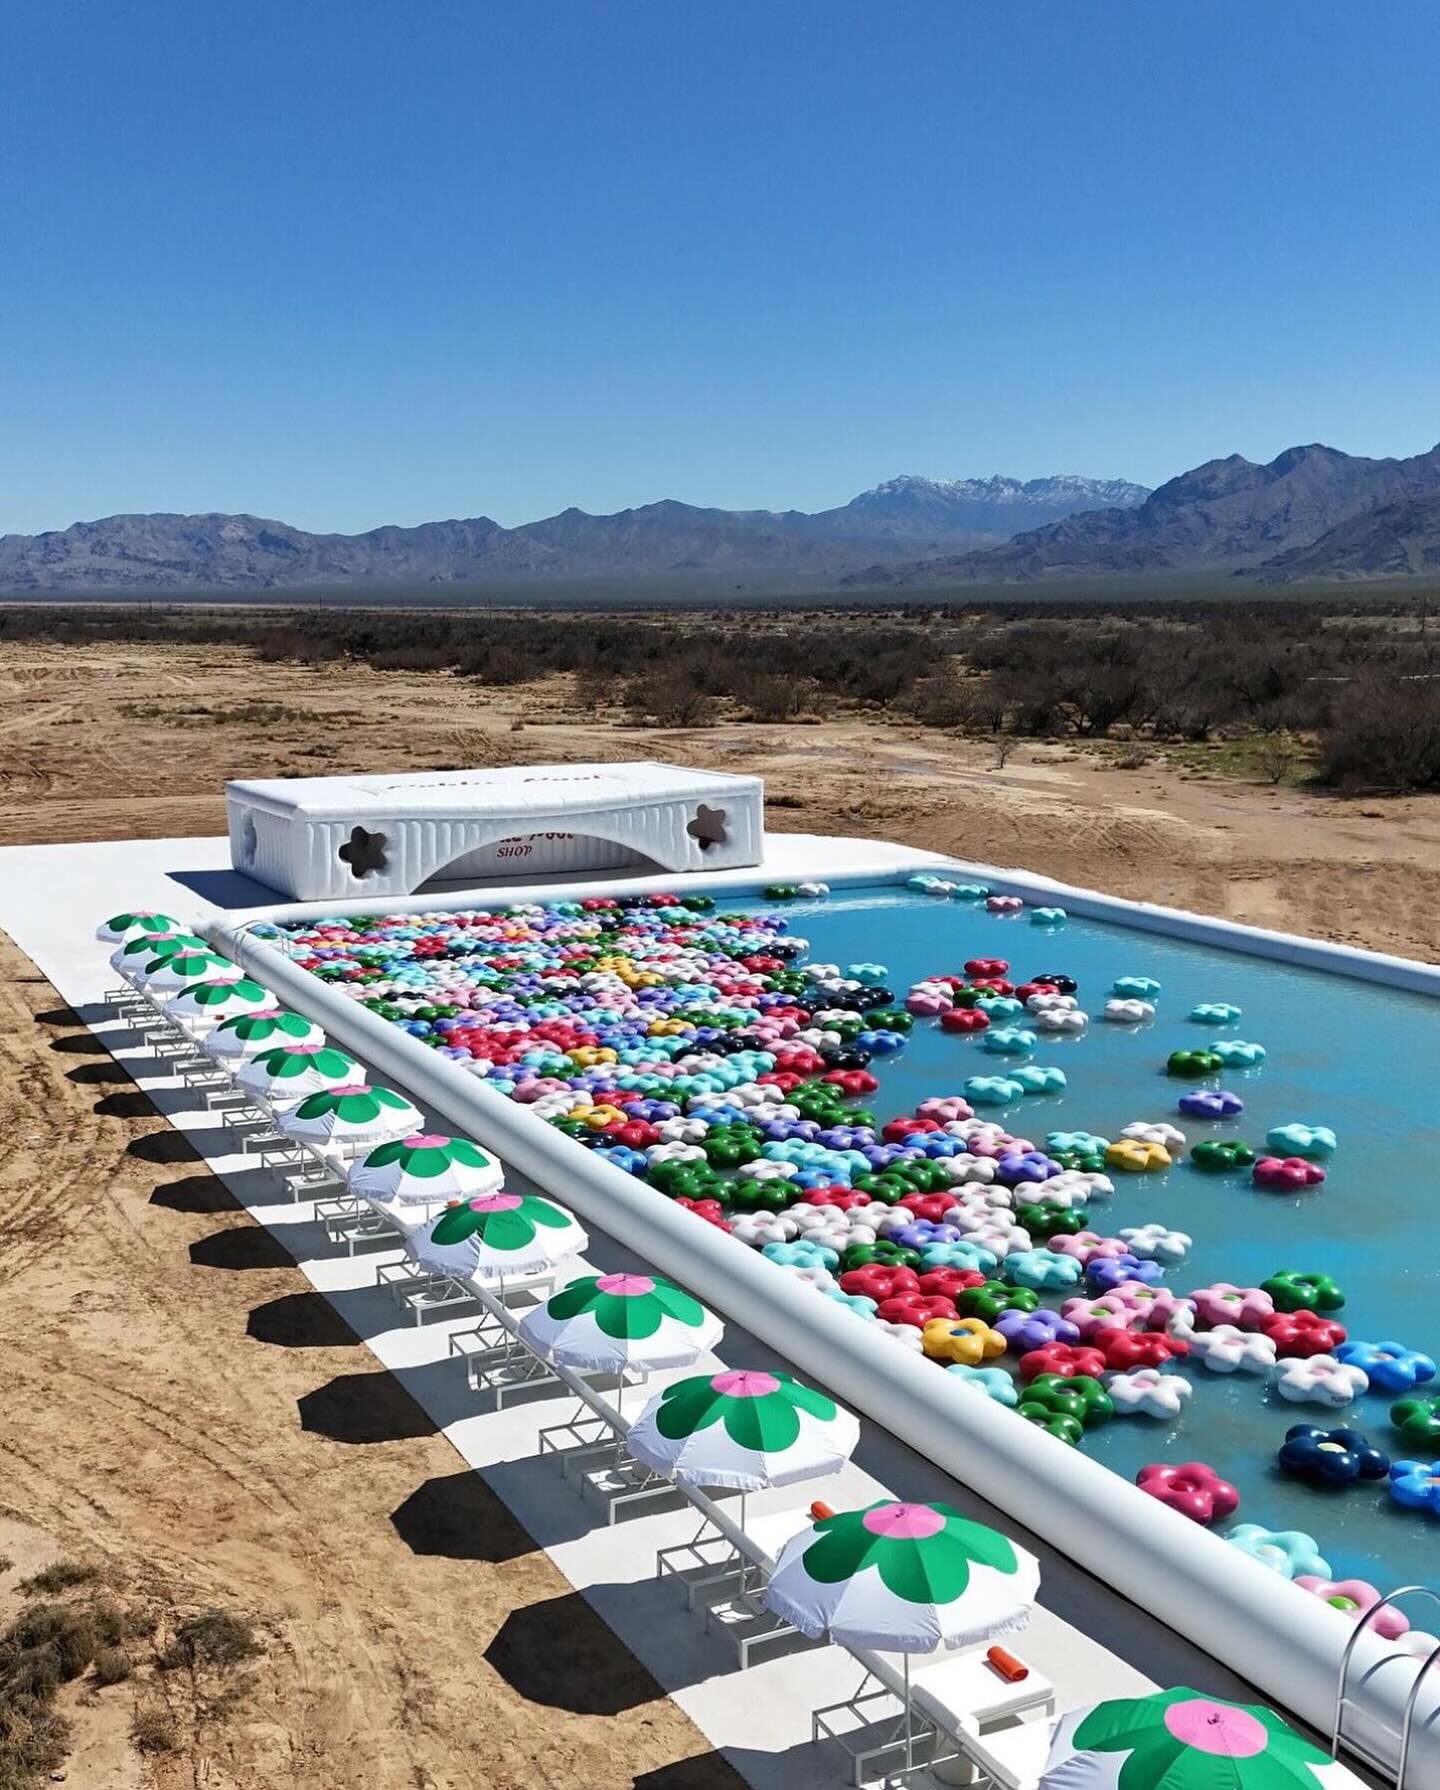 Sunday Inspiration: How @cj_hendry transformed the landscape of Sandy Valley in Nevada 🌵 We are obsessed with pools 💦 so we fell in love with that particular one ❤️

#cjhendry #swimmingpool #pool #artinstallation #nevada #sandyvalley #bikinidesigne